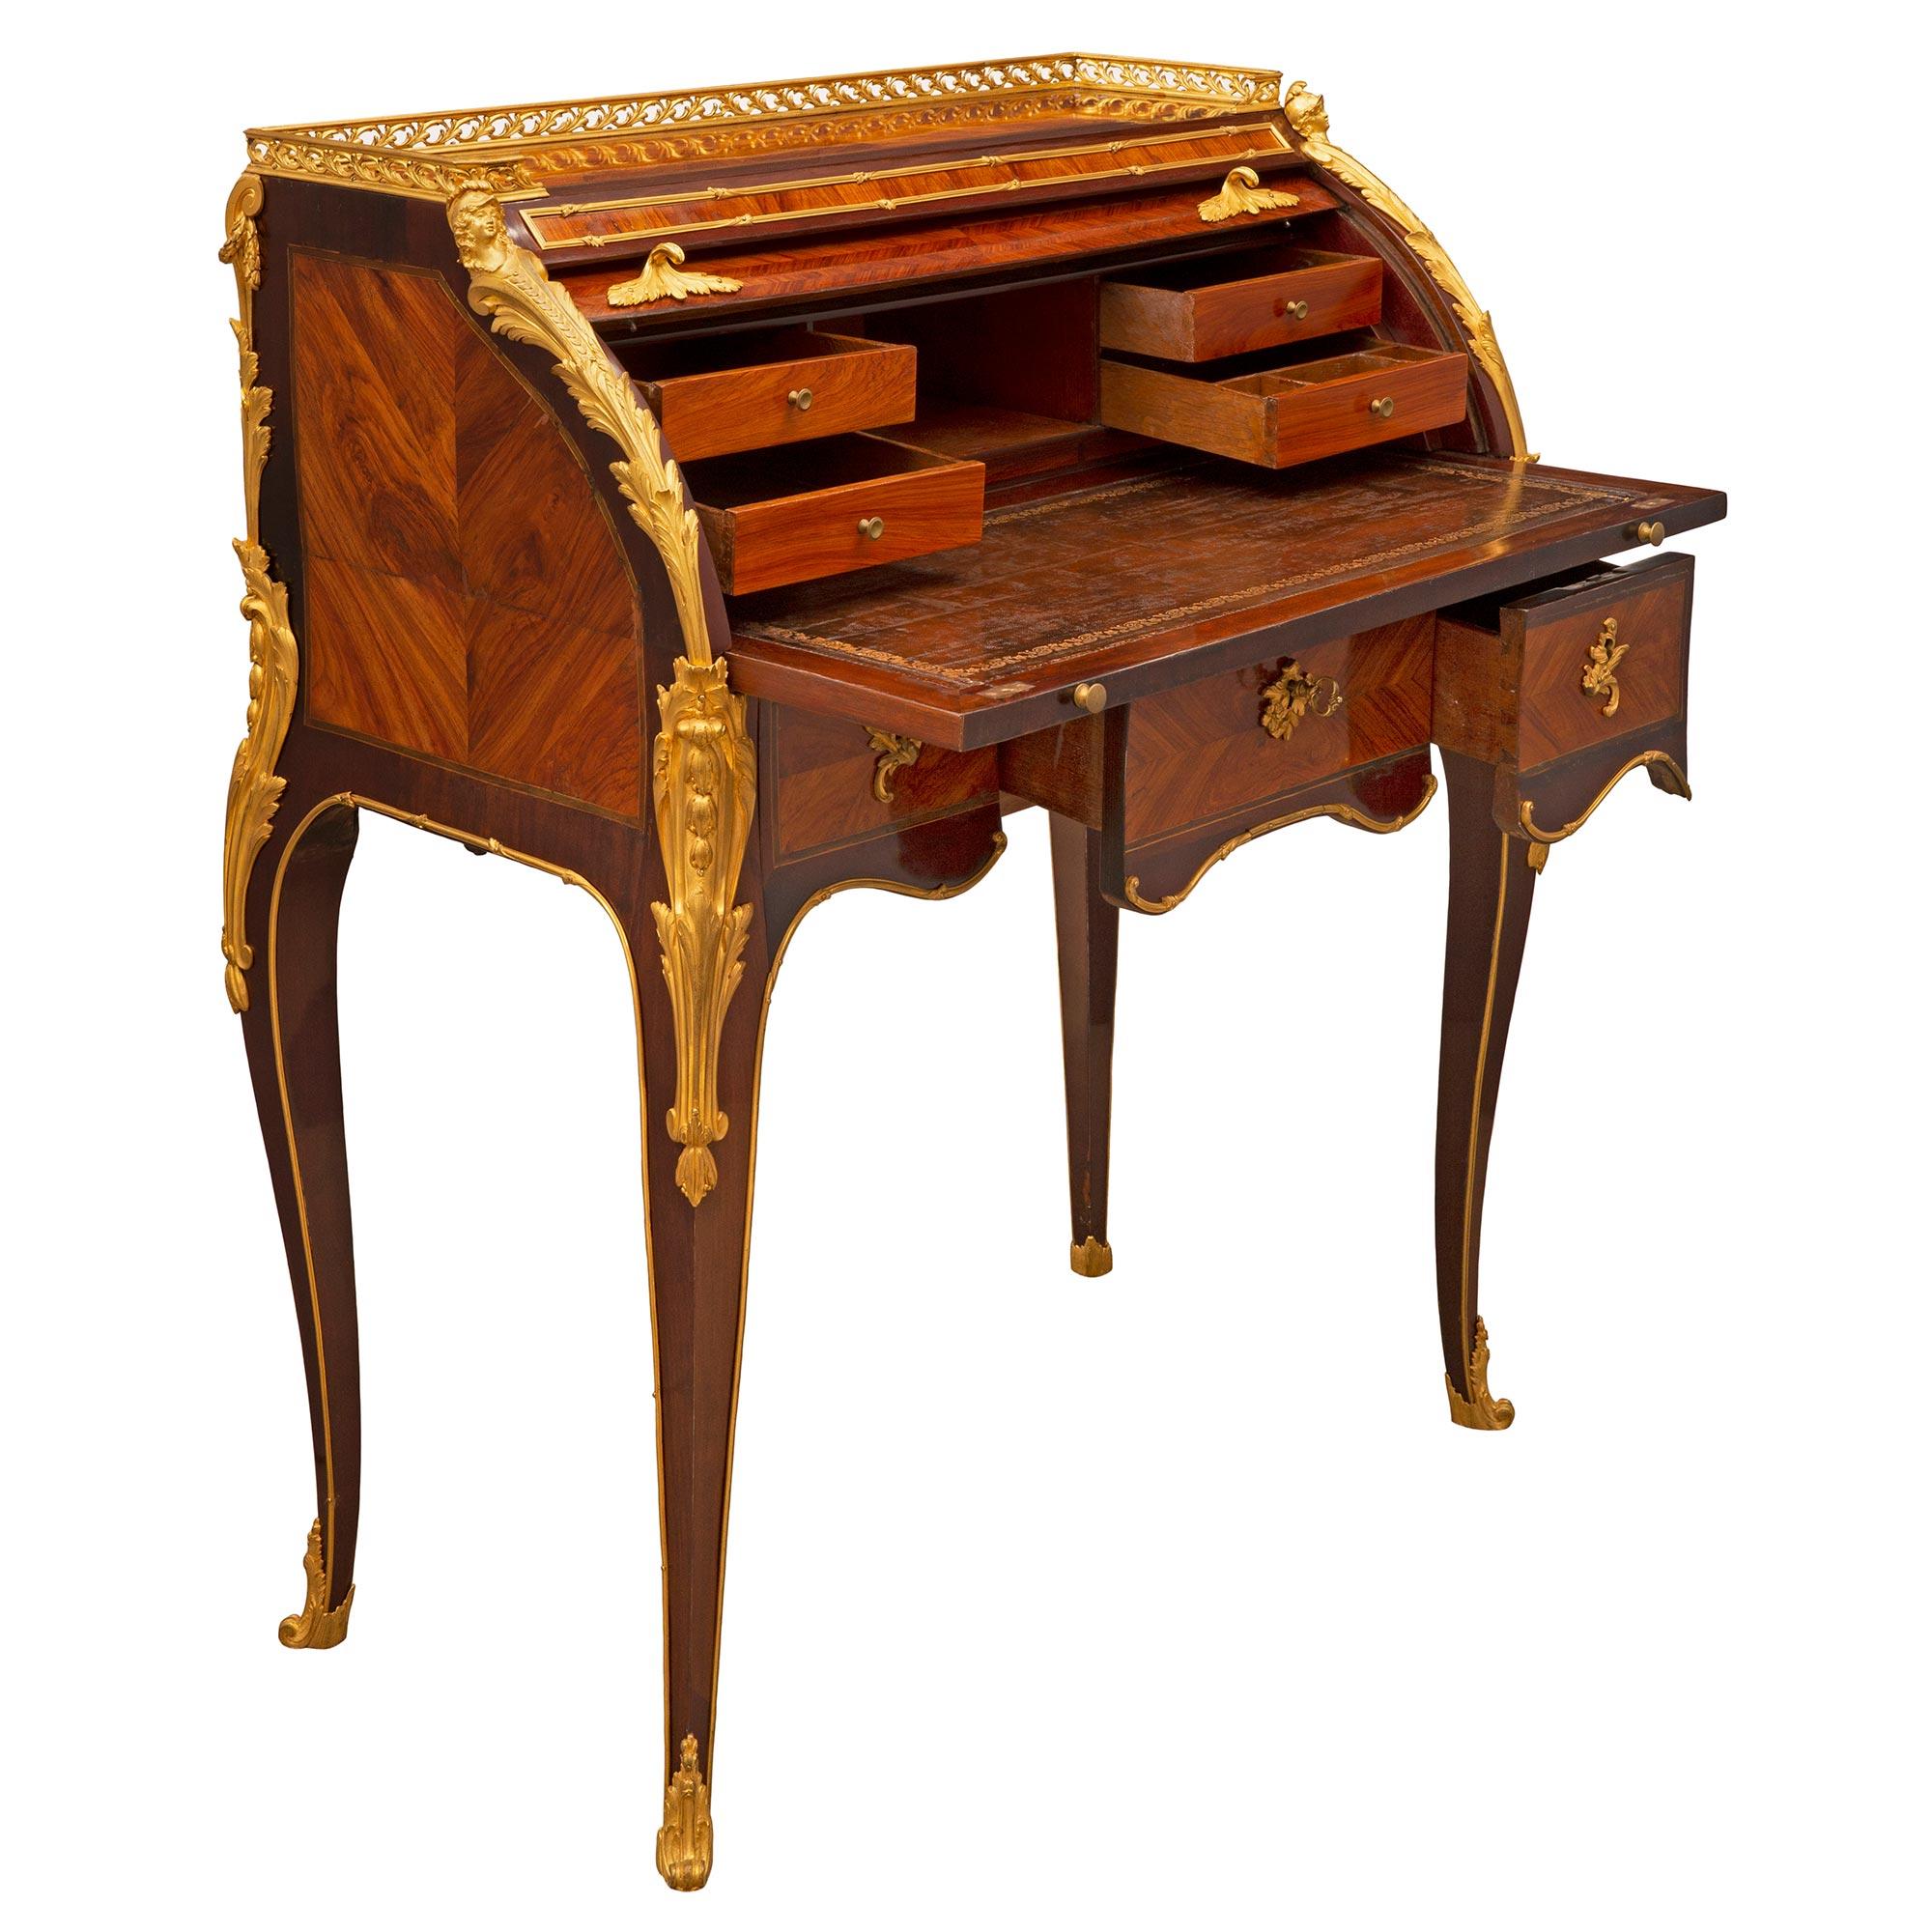 French 18th Century Louis XV Period Kingwood, Tulipwood and Ormolu Desk In Good Condition For Sale In West Palm Beach, FL